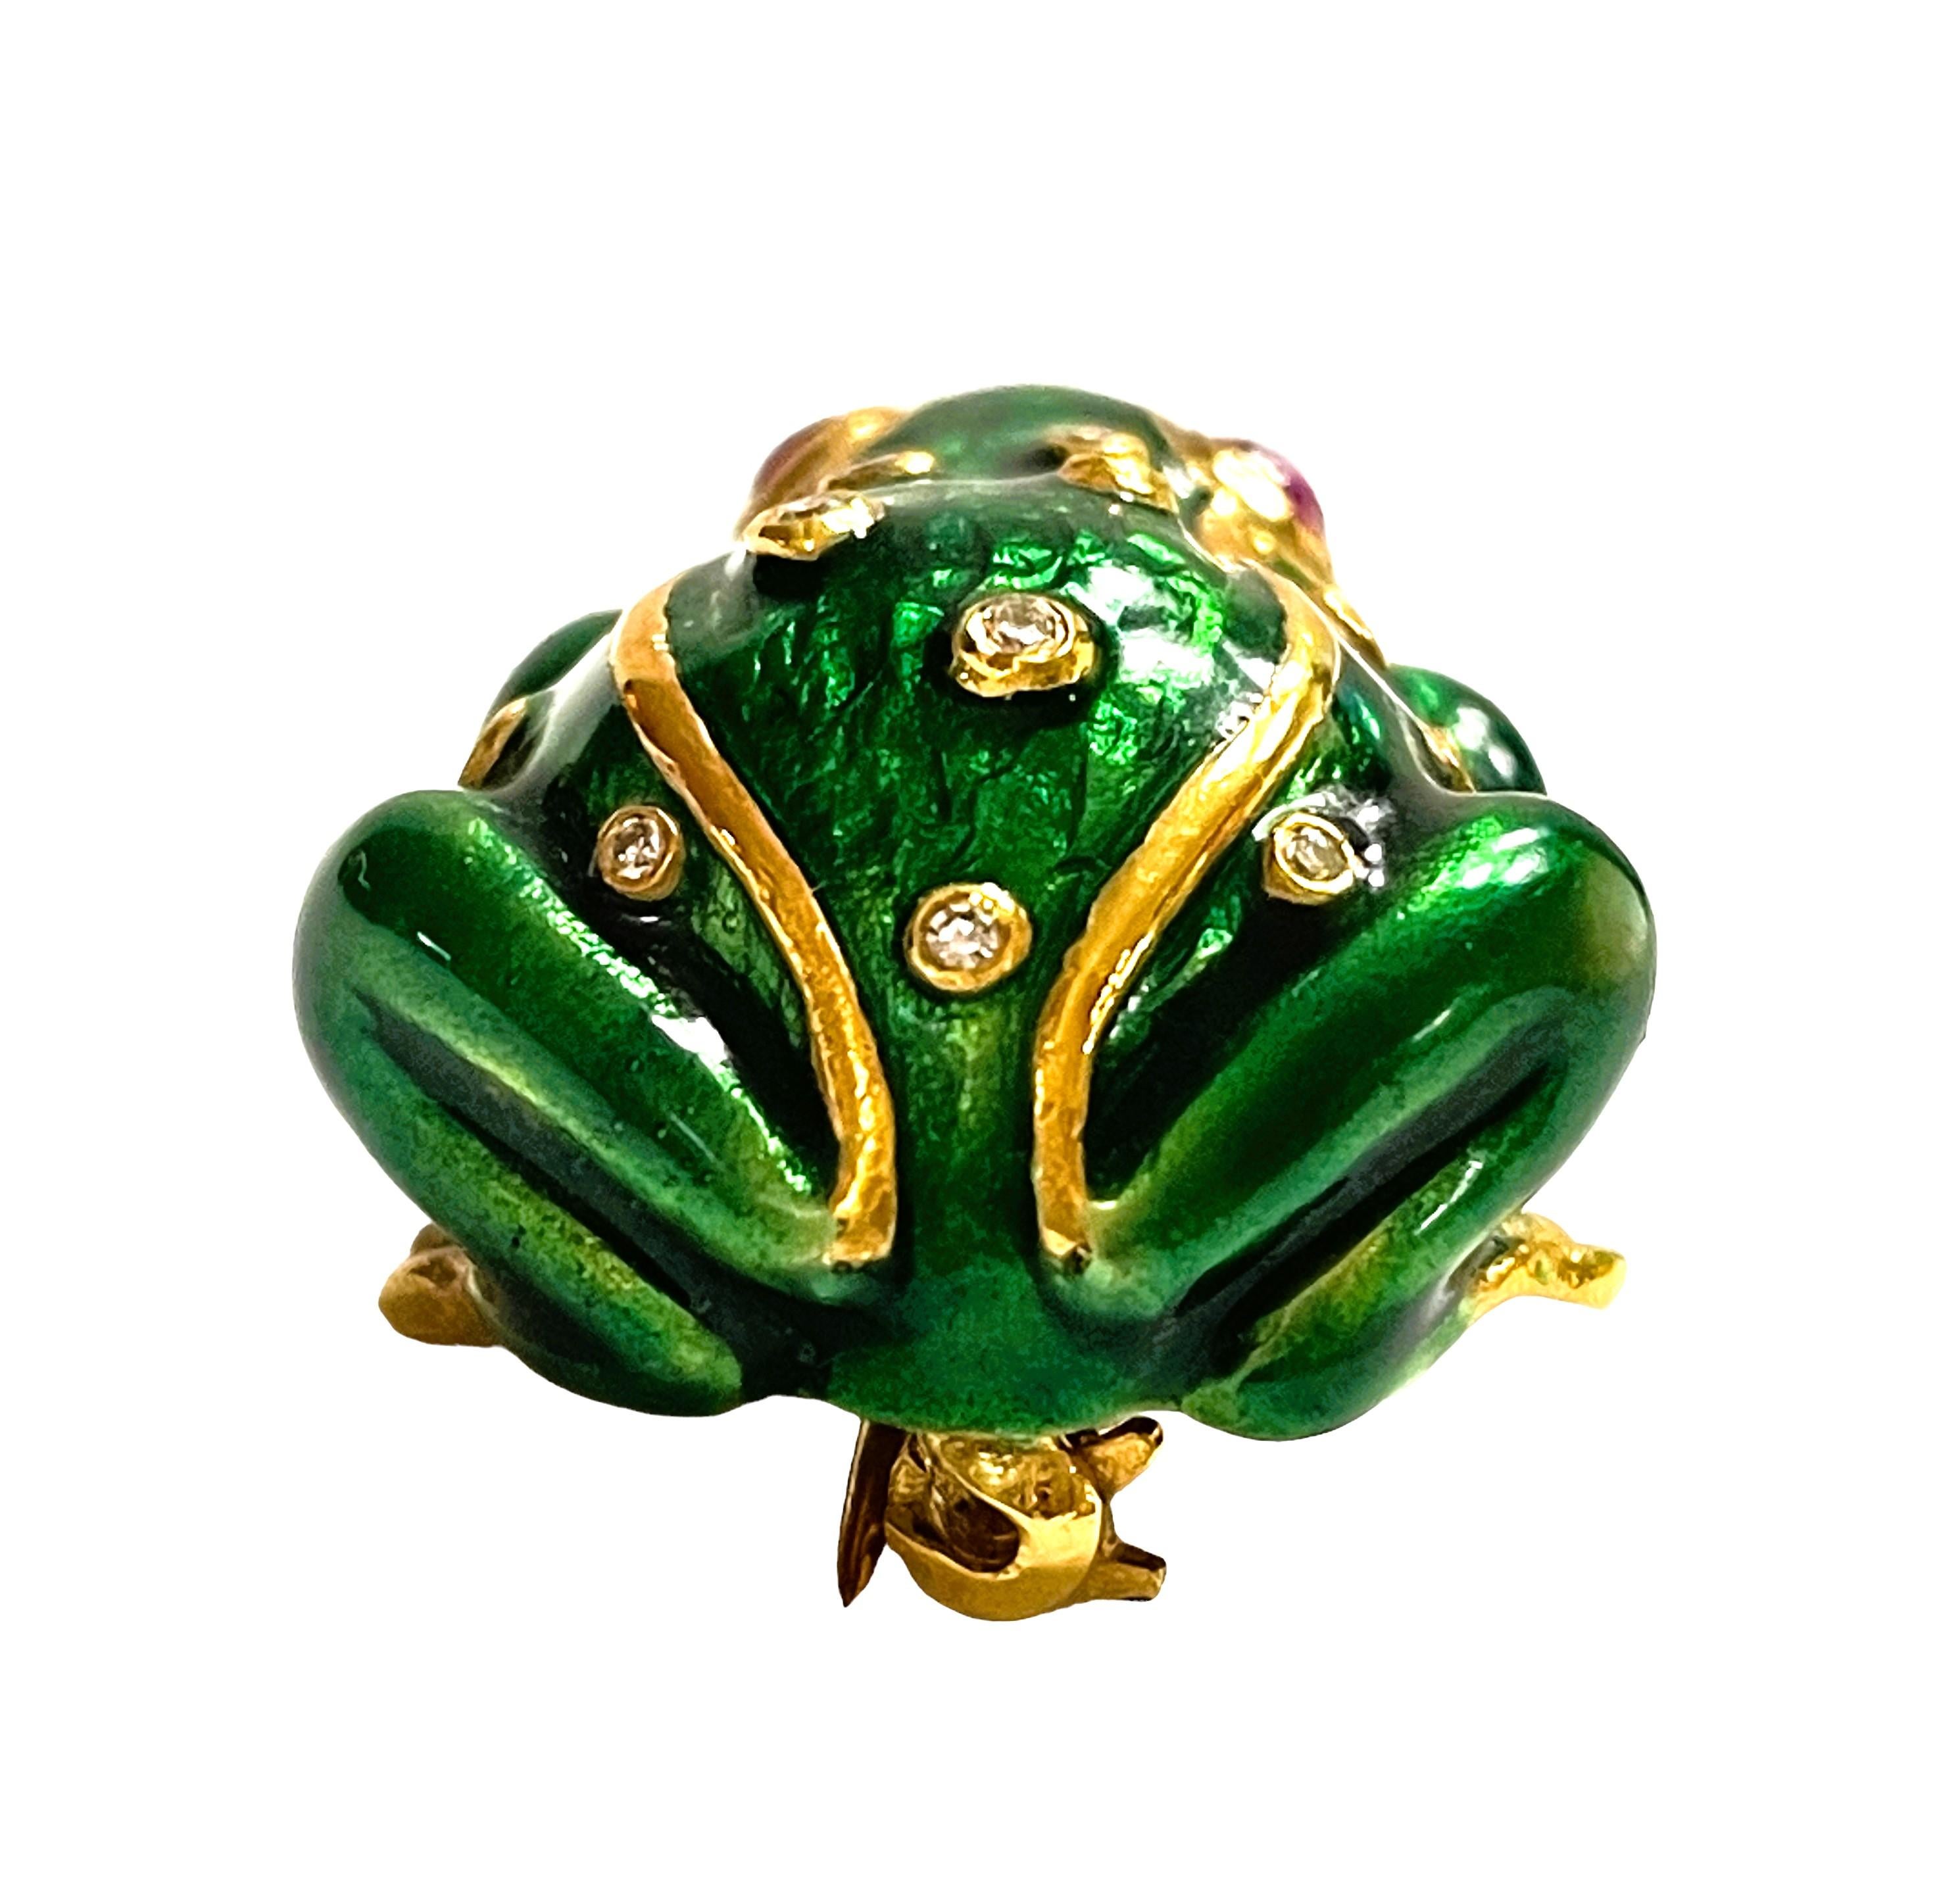 Women's Handmade 21k Yellow Gold Enamel Frog Pin/Pedant with Ruby Eyes and Diamond Bumps